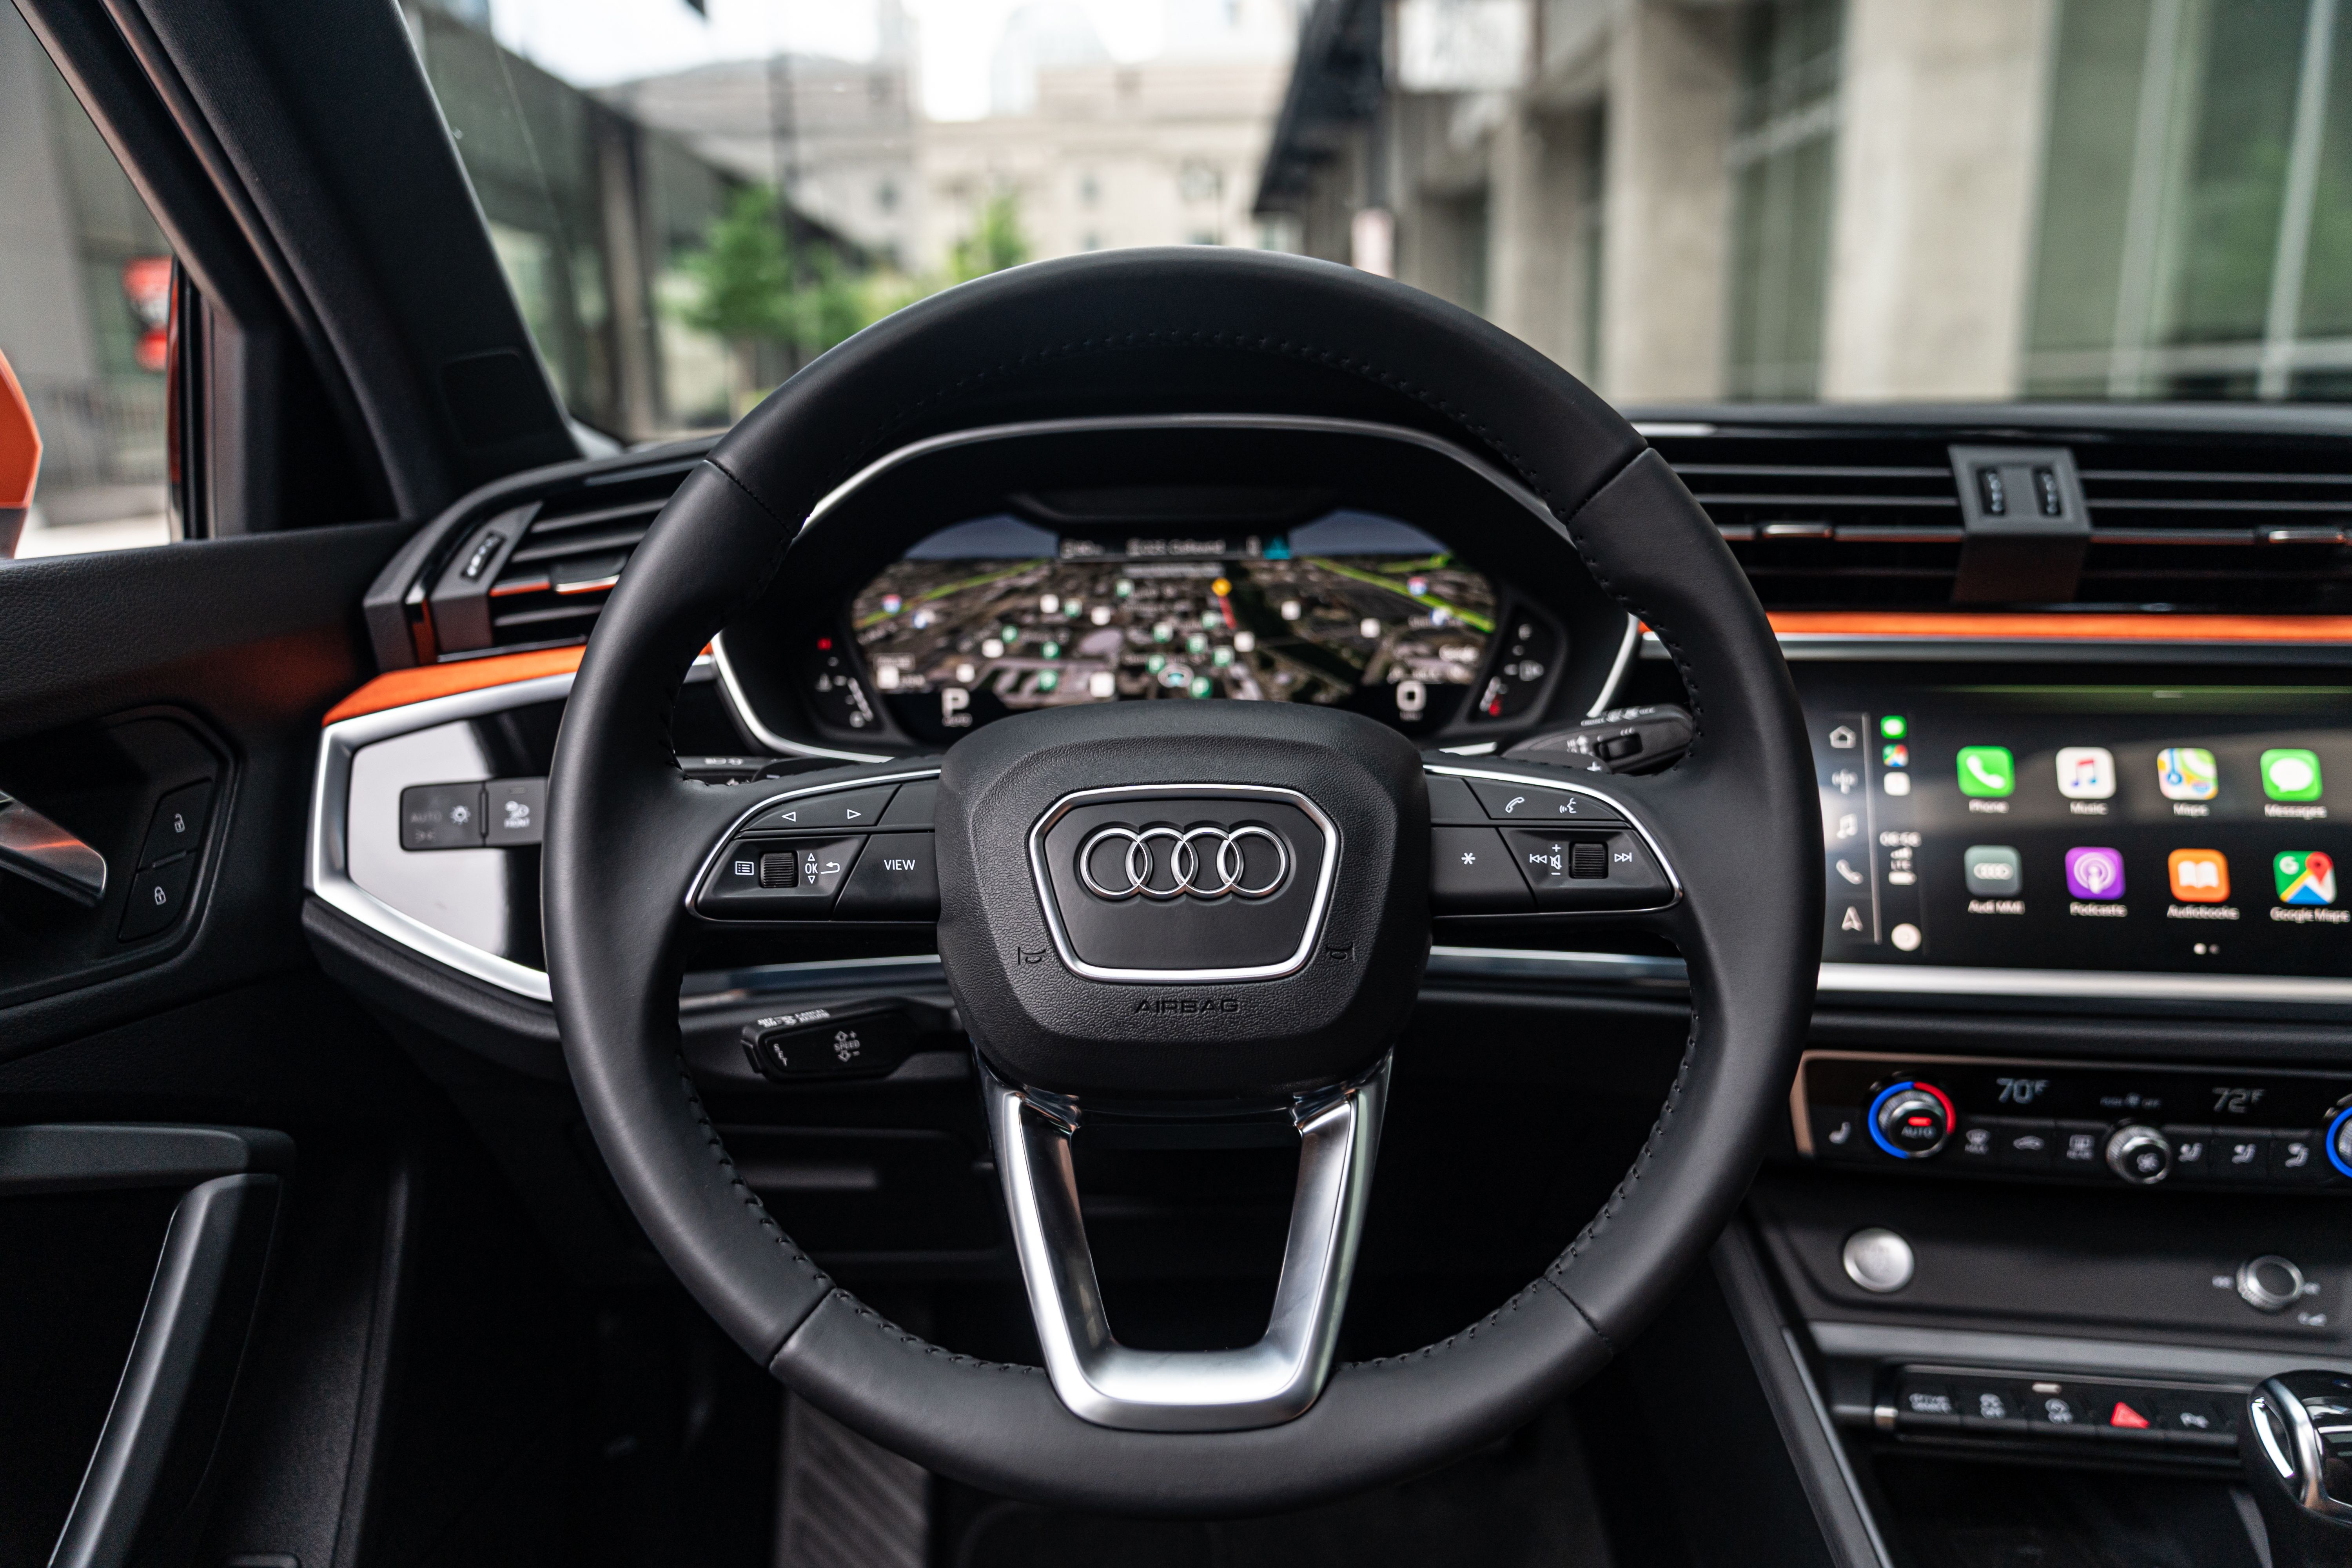 Gallery Inside The 2019 Audi Q3